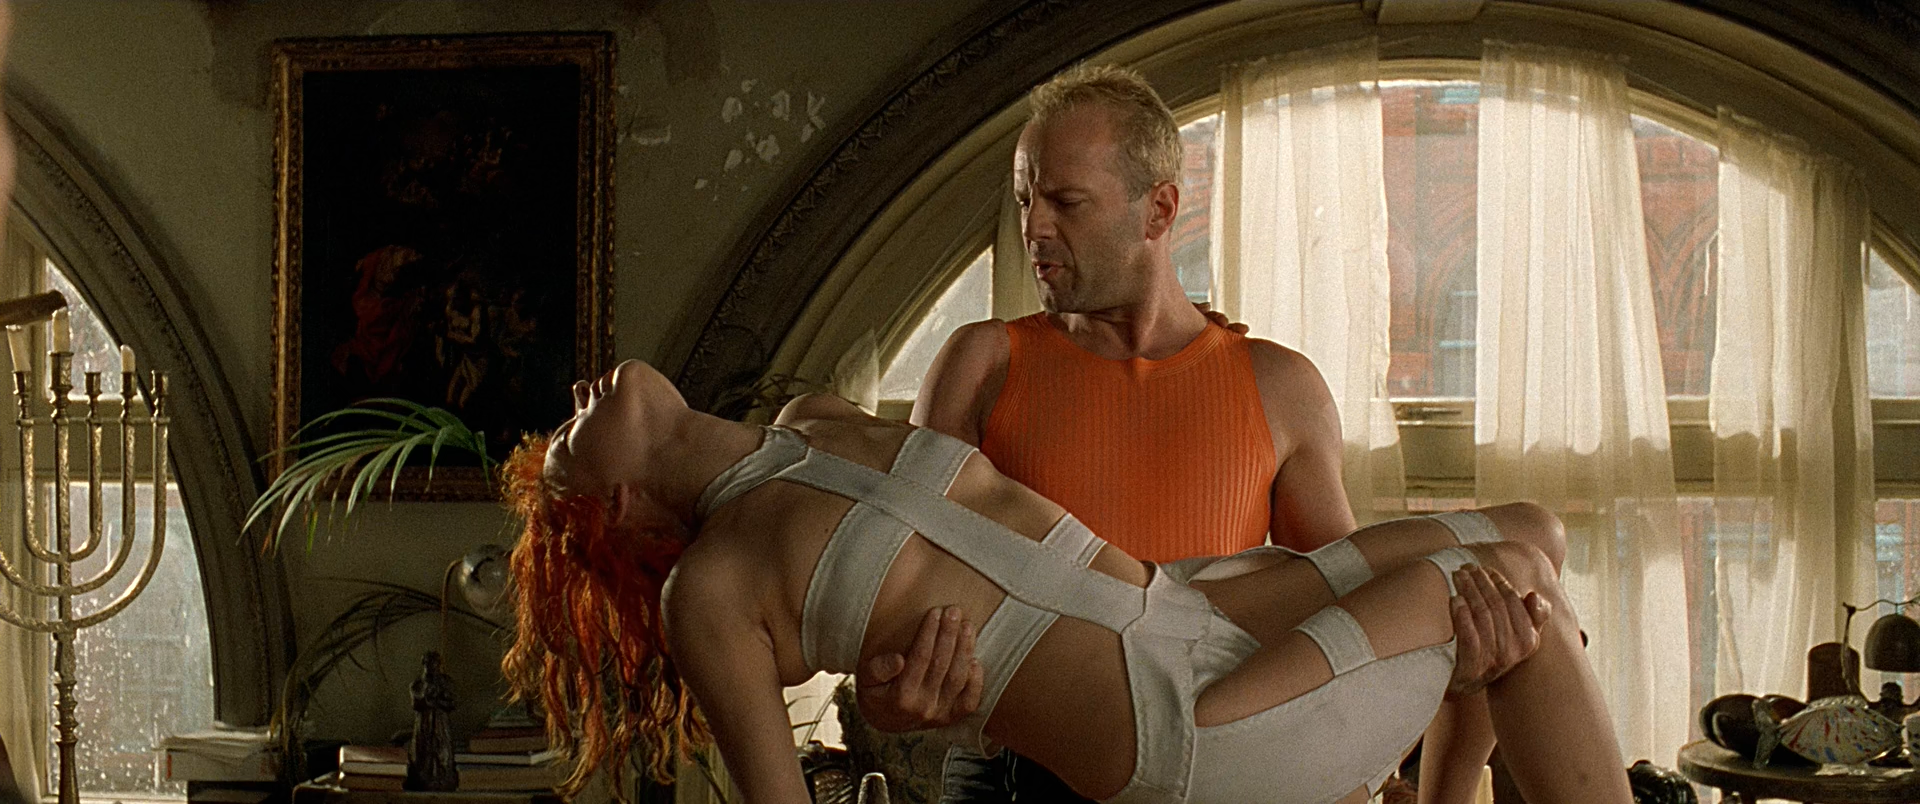 The.Fifth.Element.1997.1080p_HEVCCLUB058138.png. 